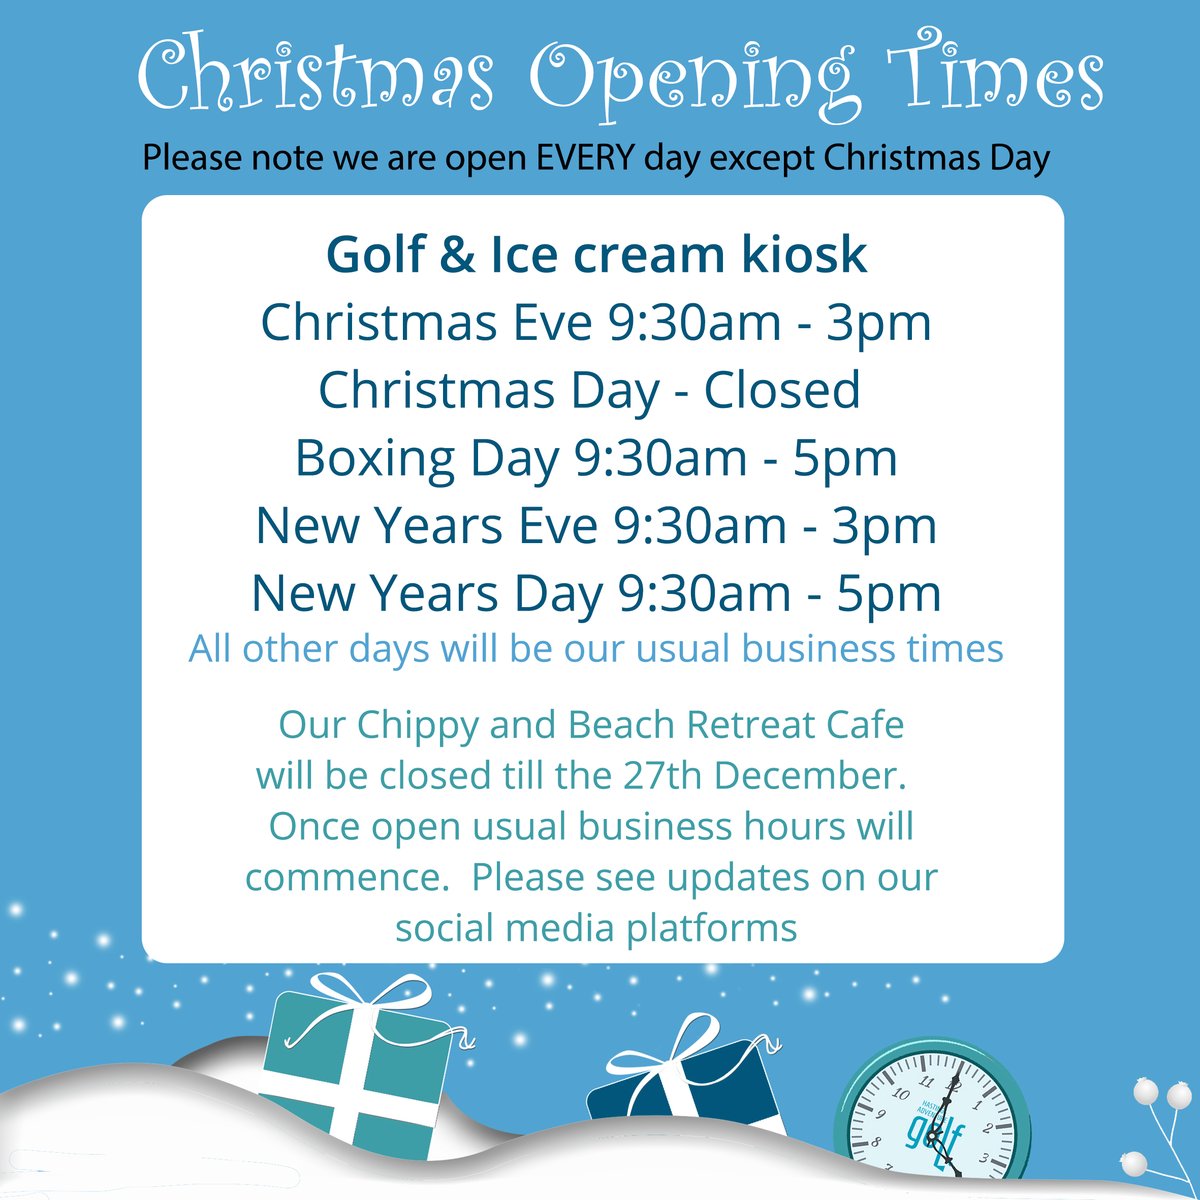 We are open every day except Christmas day but please note the changes to some of the opening times on the special days over Christmas below. #christmastime #openingtimes #hastingsadventuregolf #hastings #minigolf